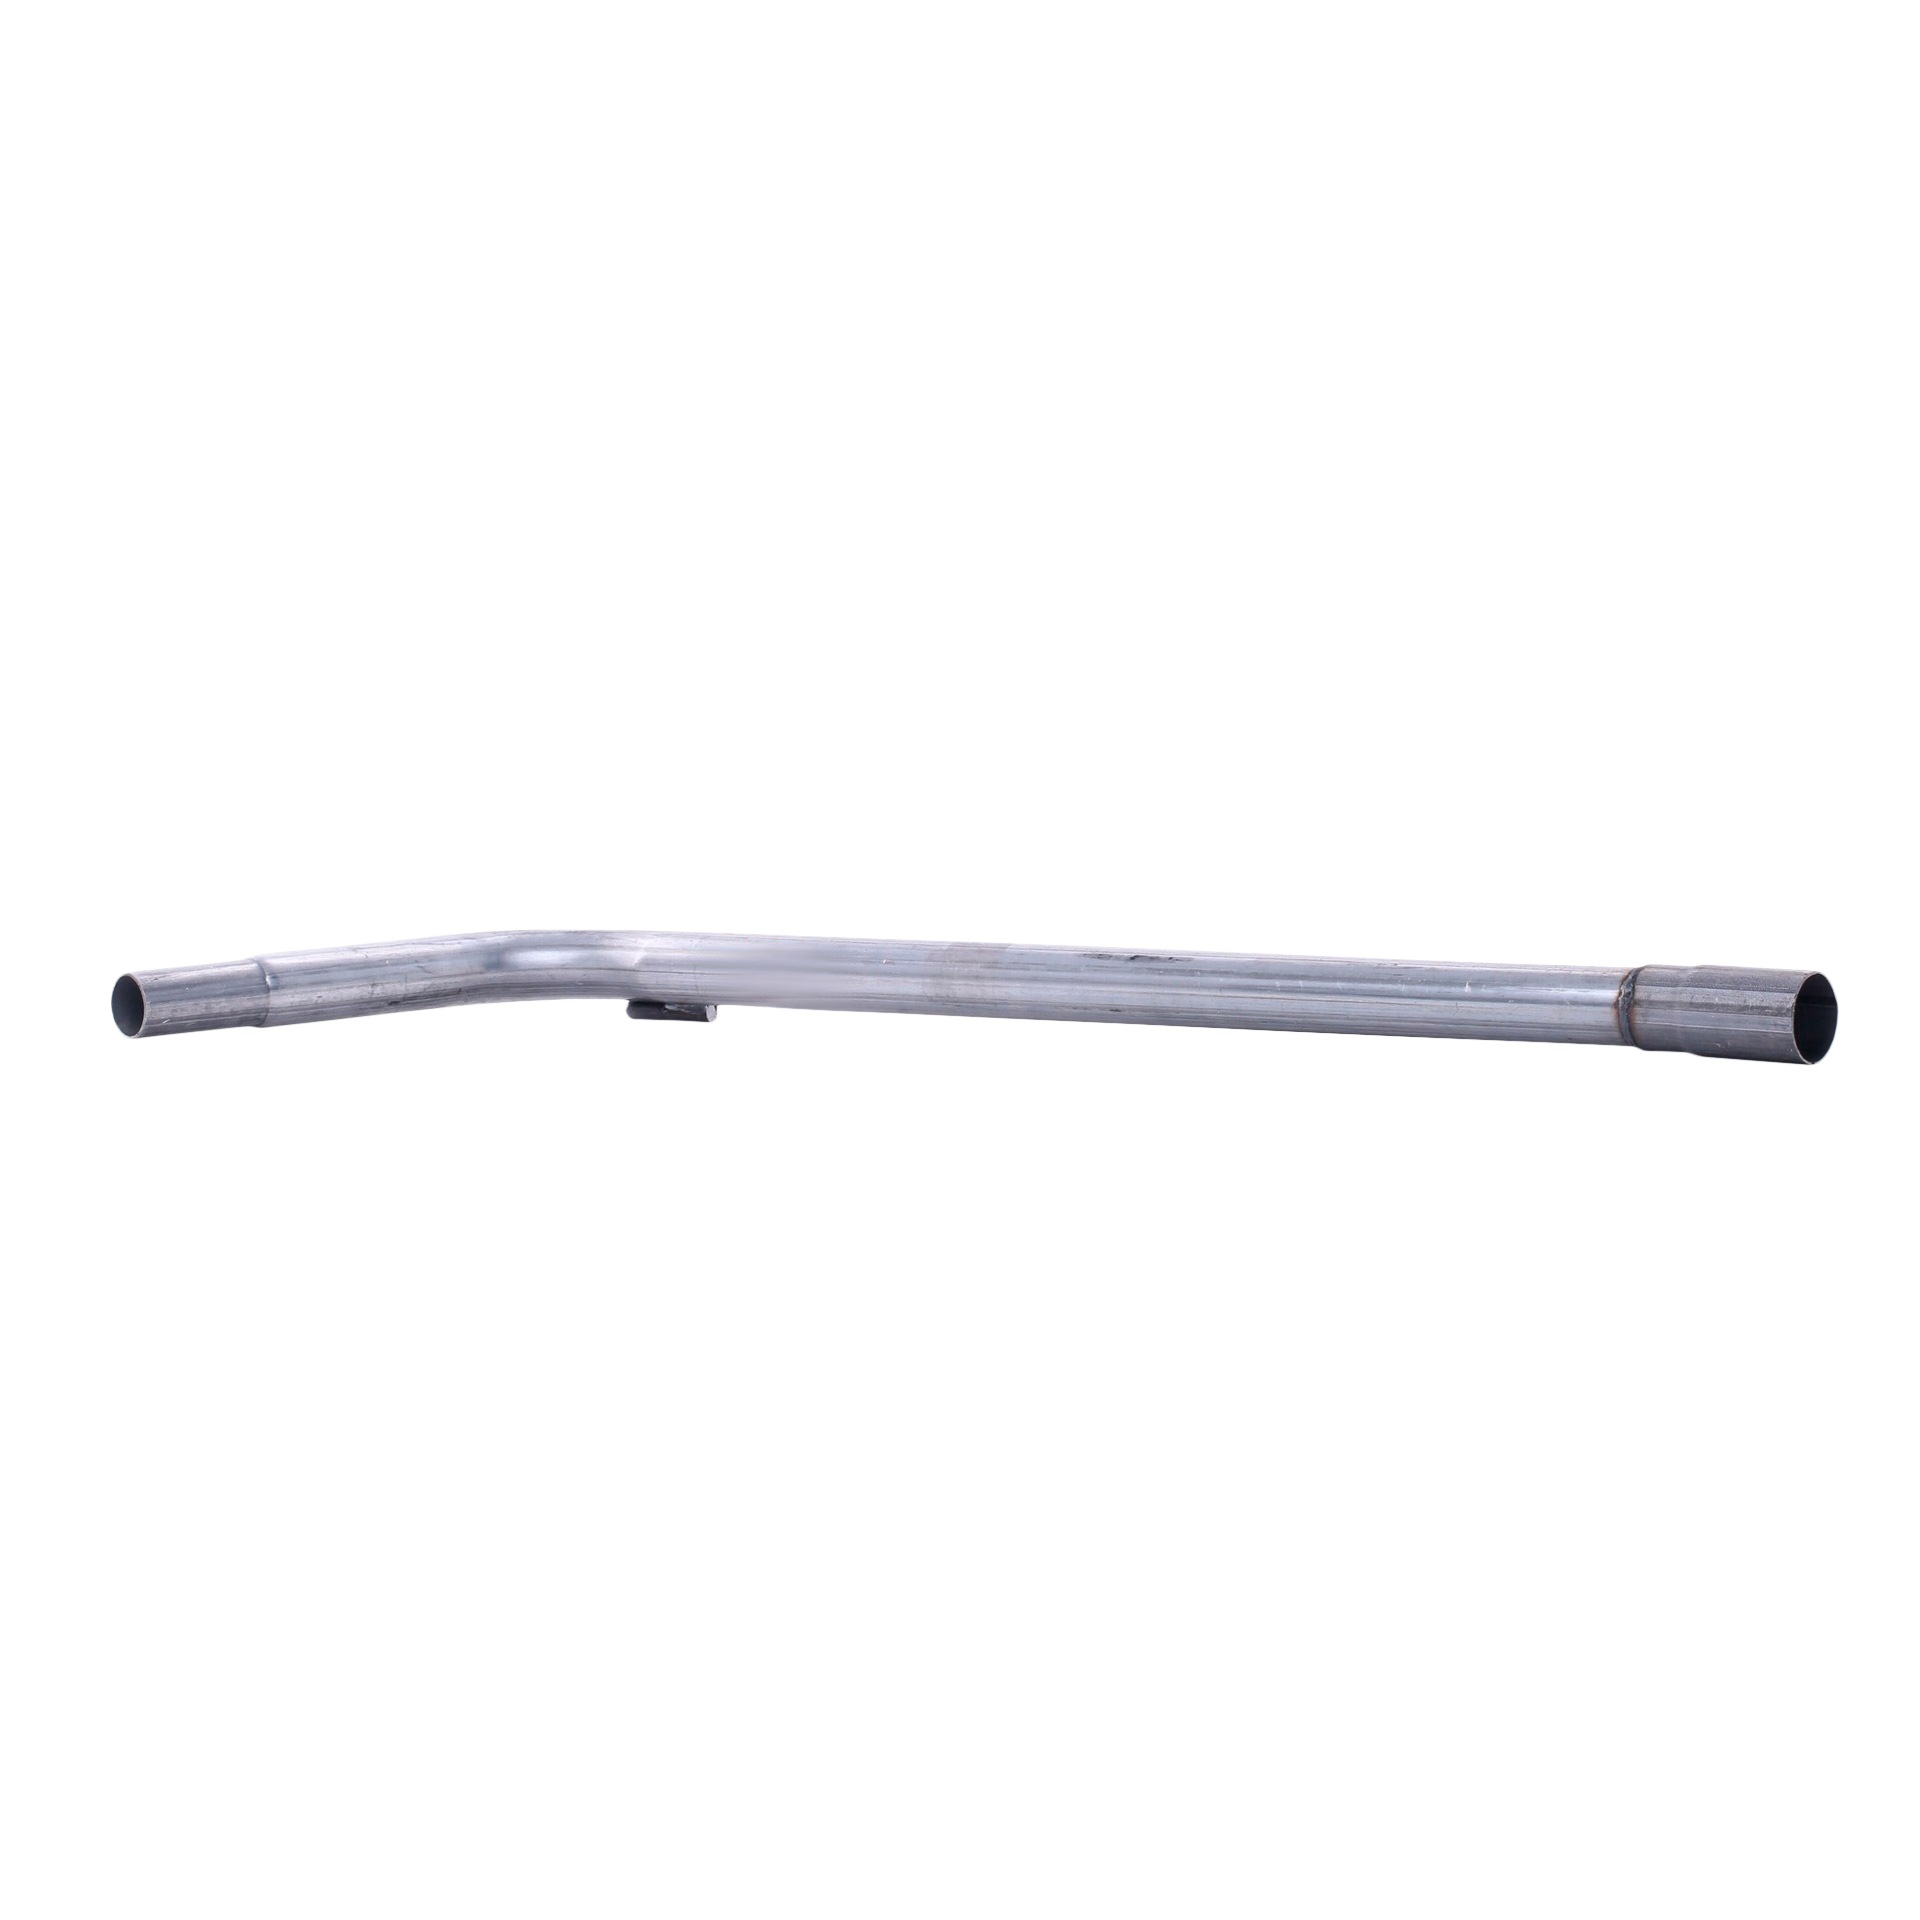 Original BOSAL Exhaust pipes 801-483 for VW POLO